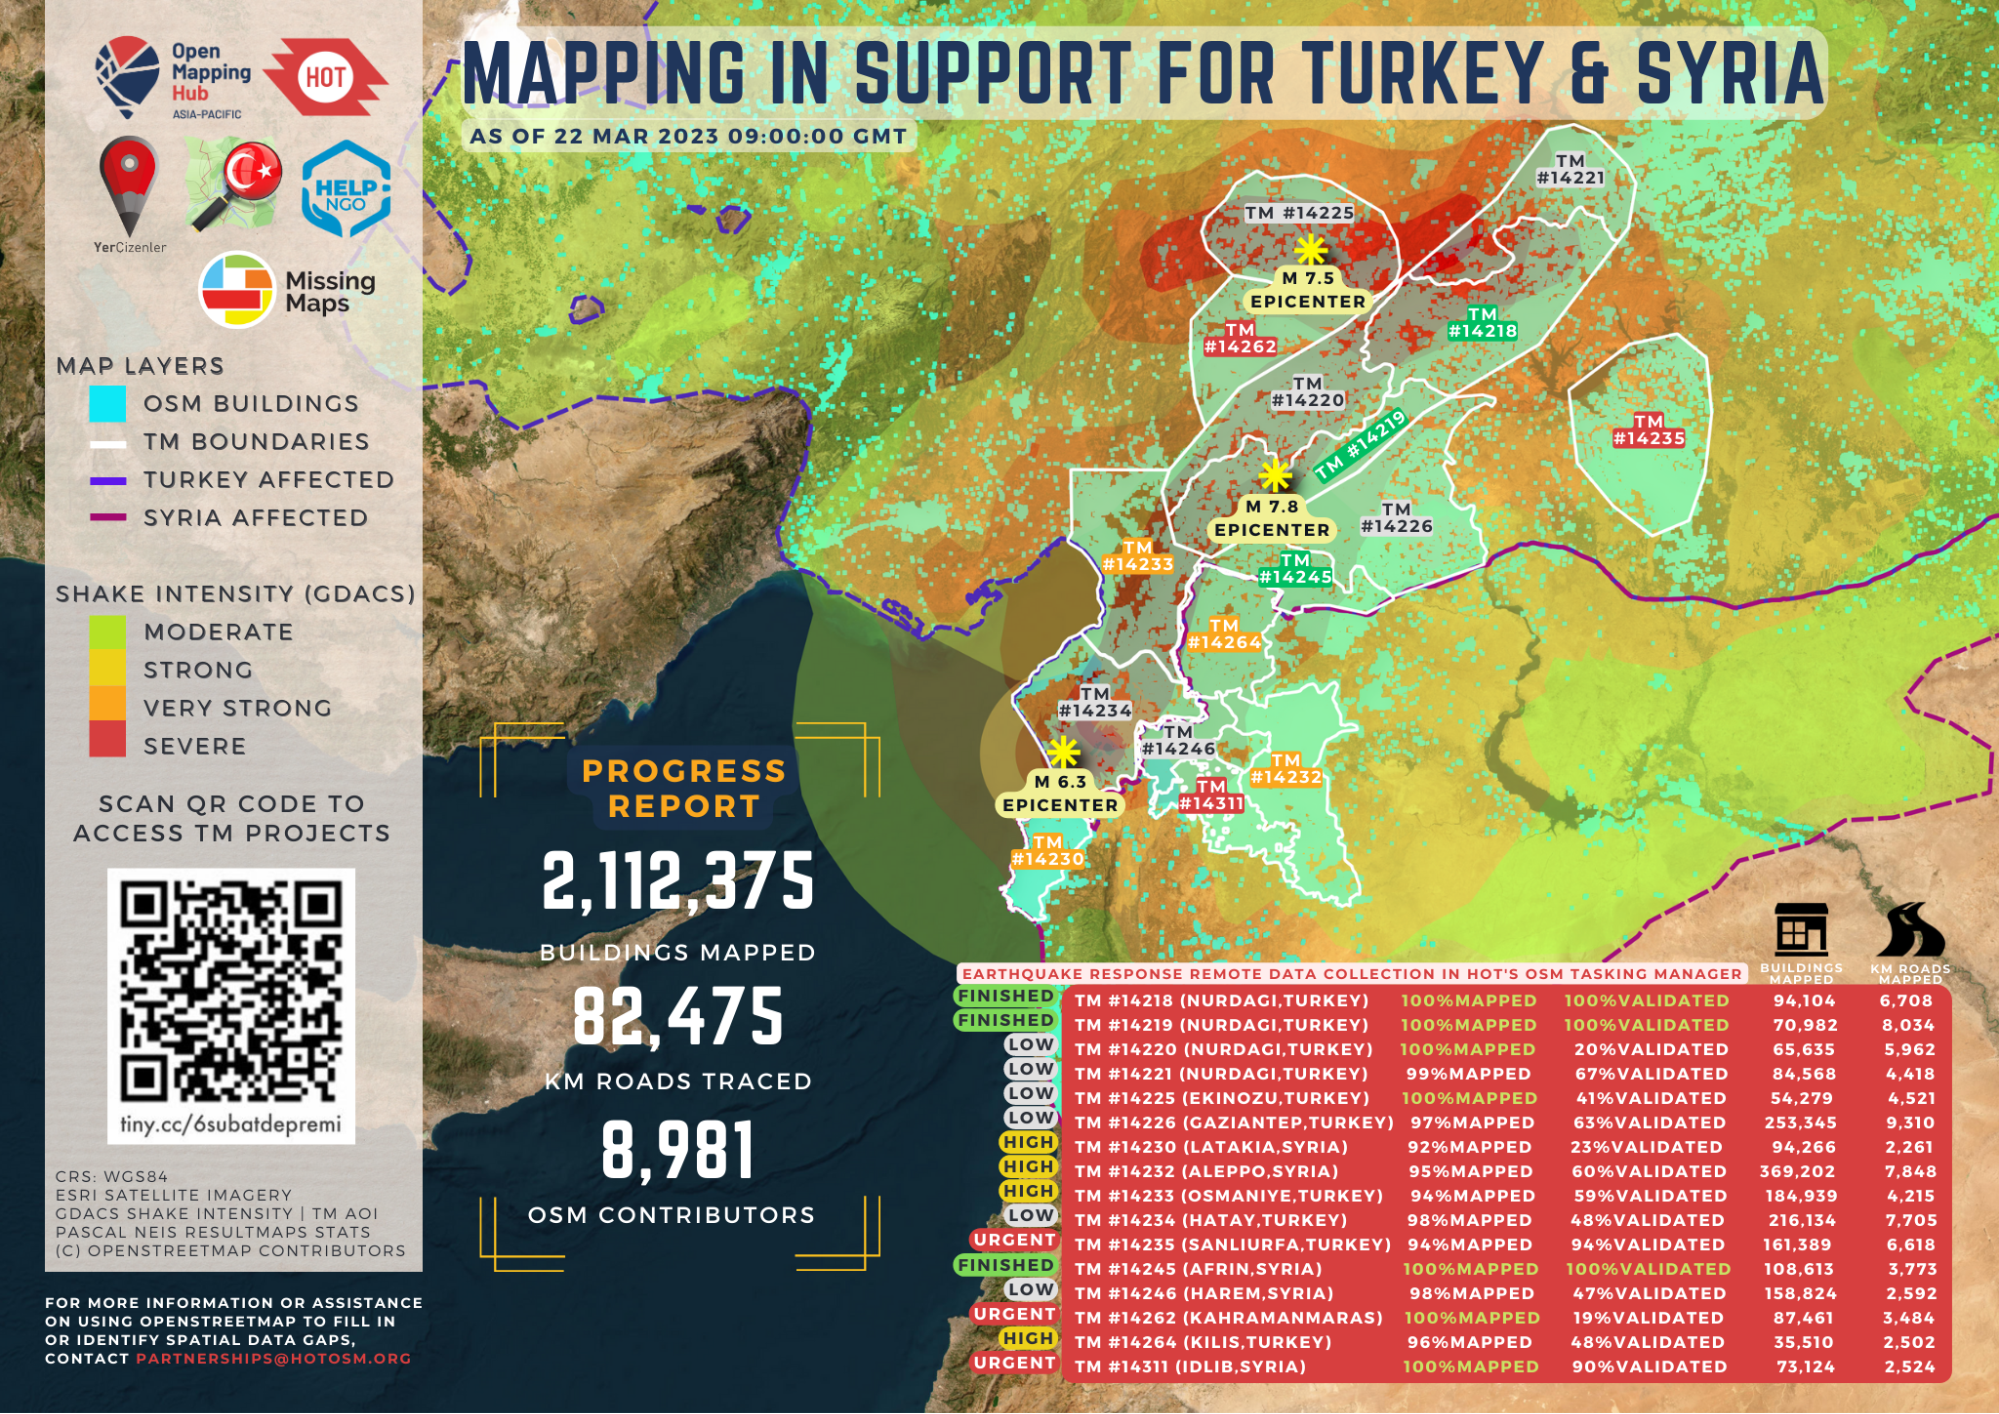 Mapping in support for Turkey and Syria.Progress report 2,112,375 building mapped. 82,475 KM roads traced. 8981 OSM contributors